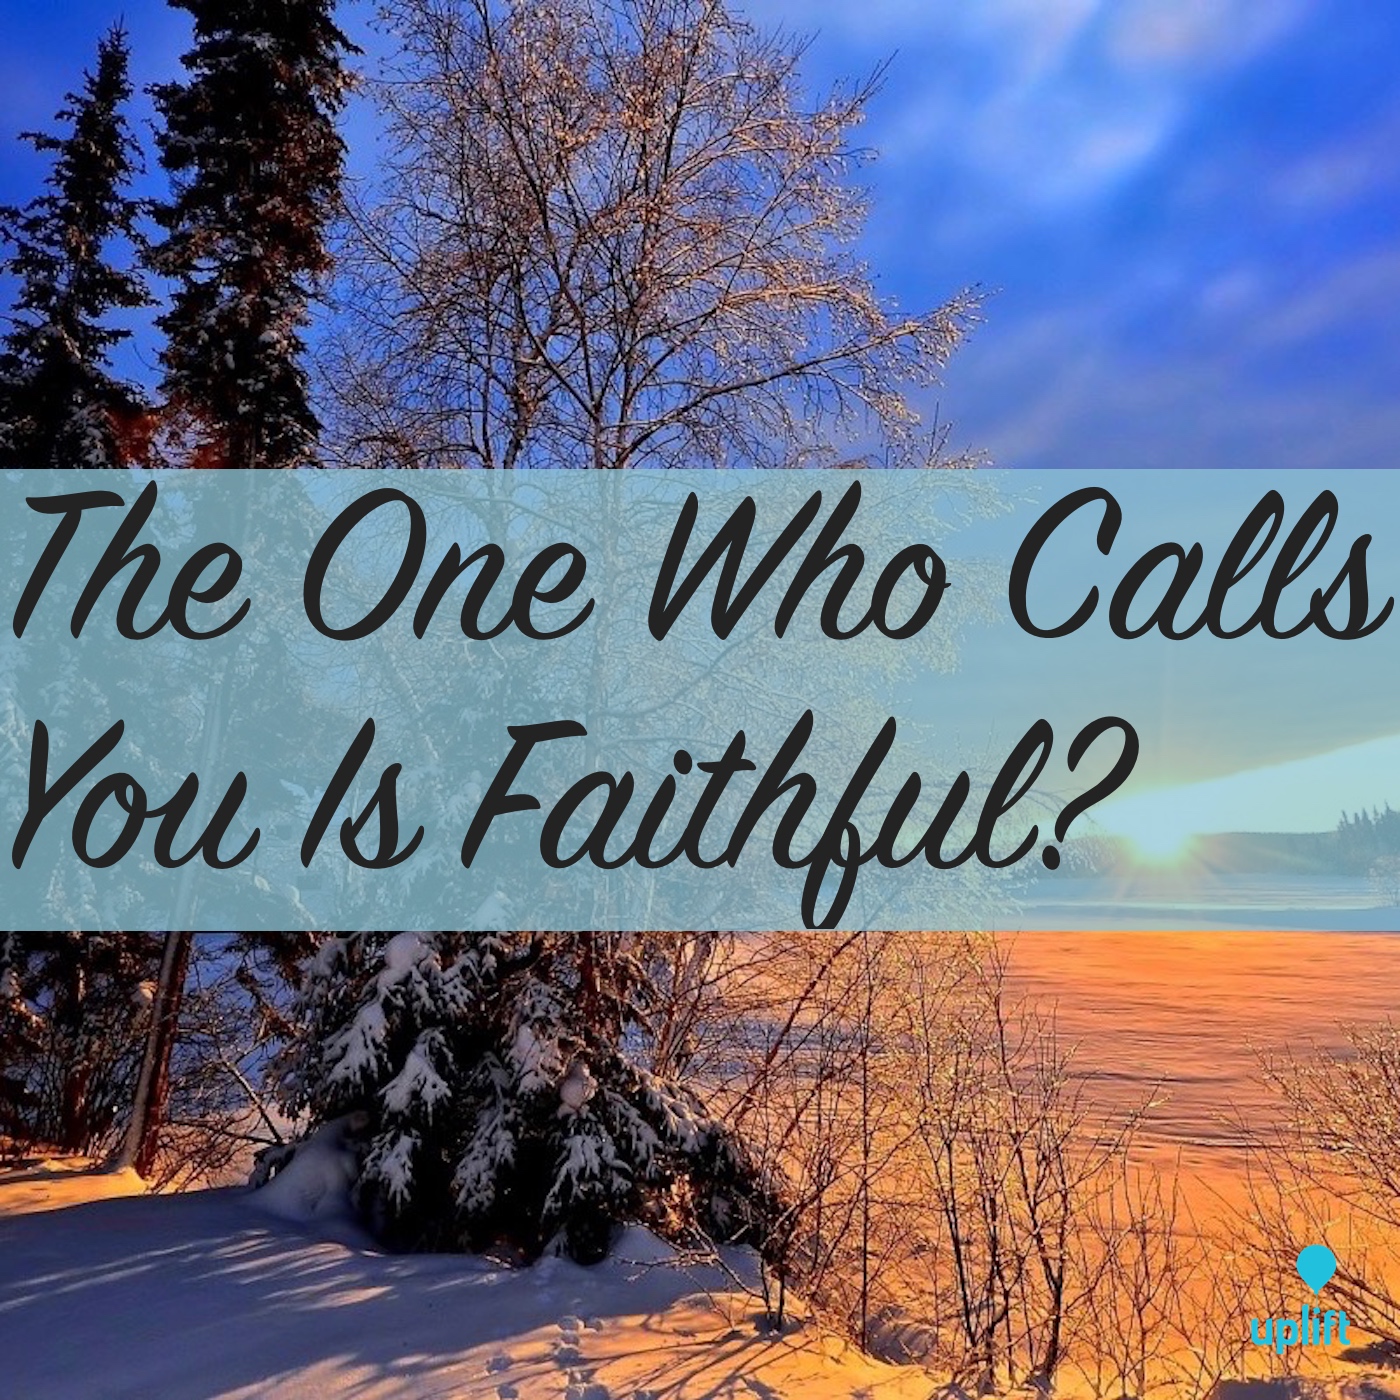 Episode 26: The One Who Calls You Is Faithful?